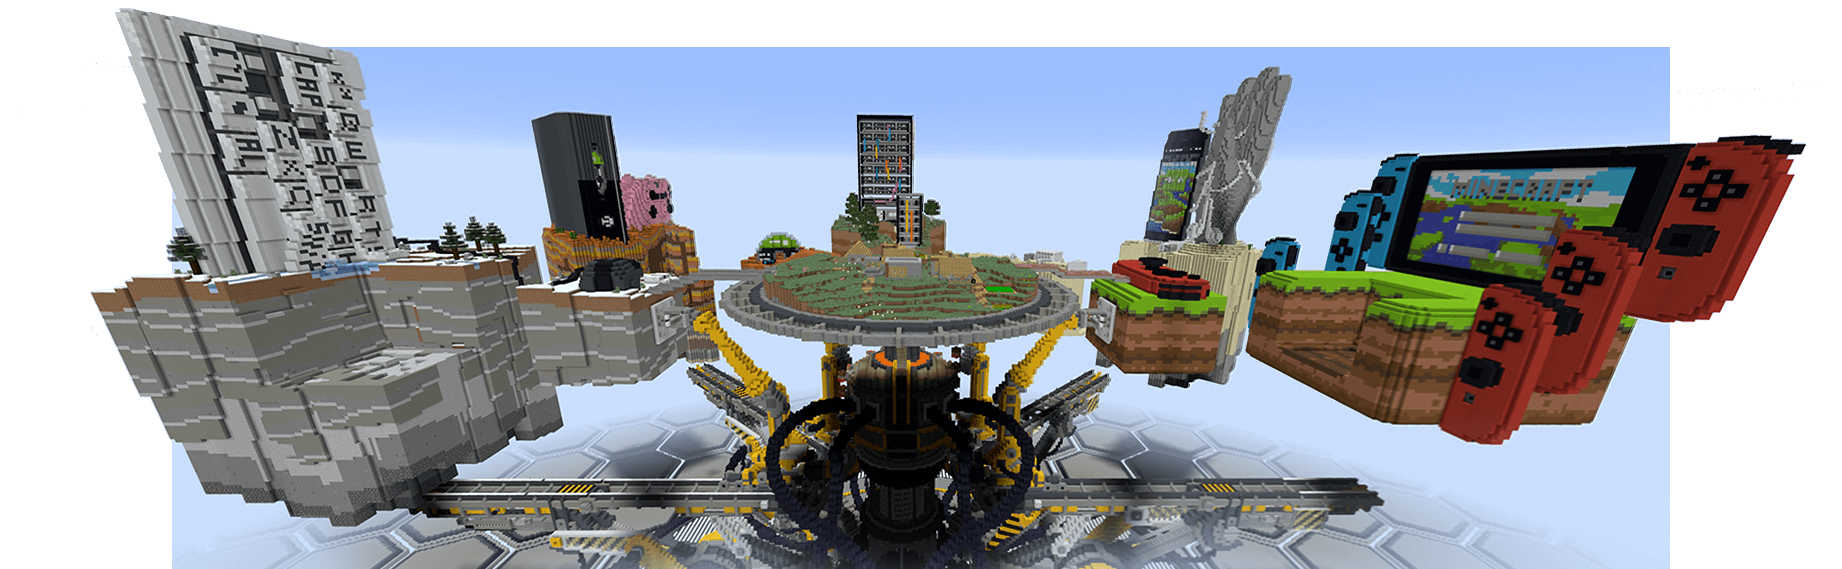 Minecraft togetherness machine, representing platforms where Minecraft is playable: PC, Xbox, mobile and Nintendo Switch.